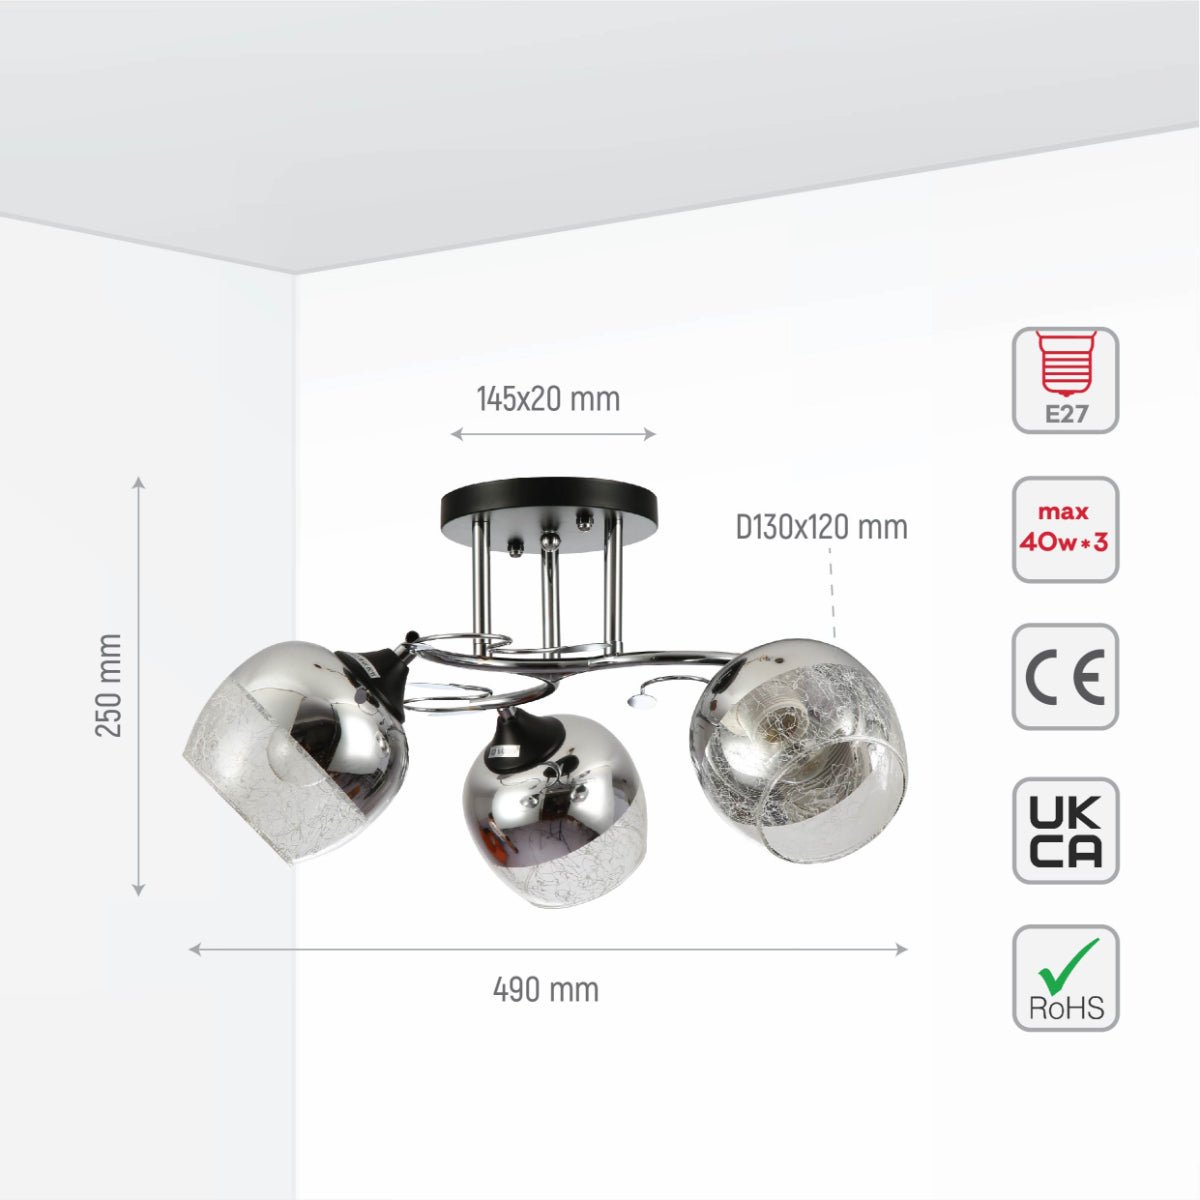 Size and specs of Chrome Metal Partial Mirror Cone Glass Ceiling Light with E27 Fittings | TEKLED 159-17606